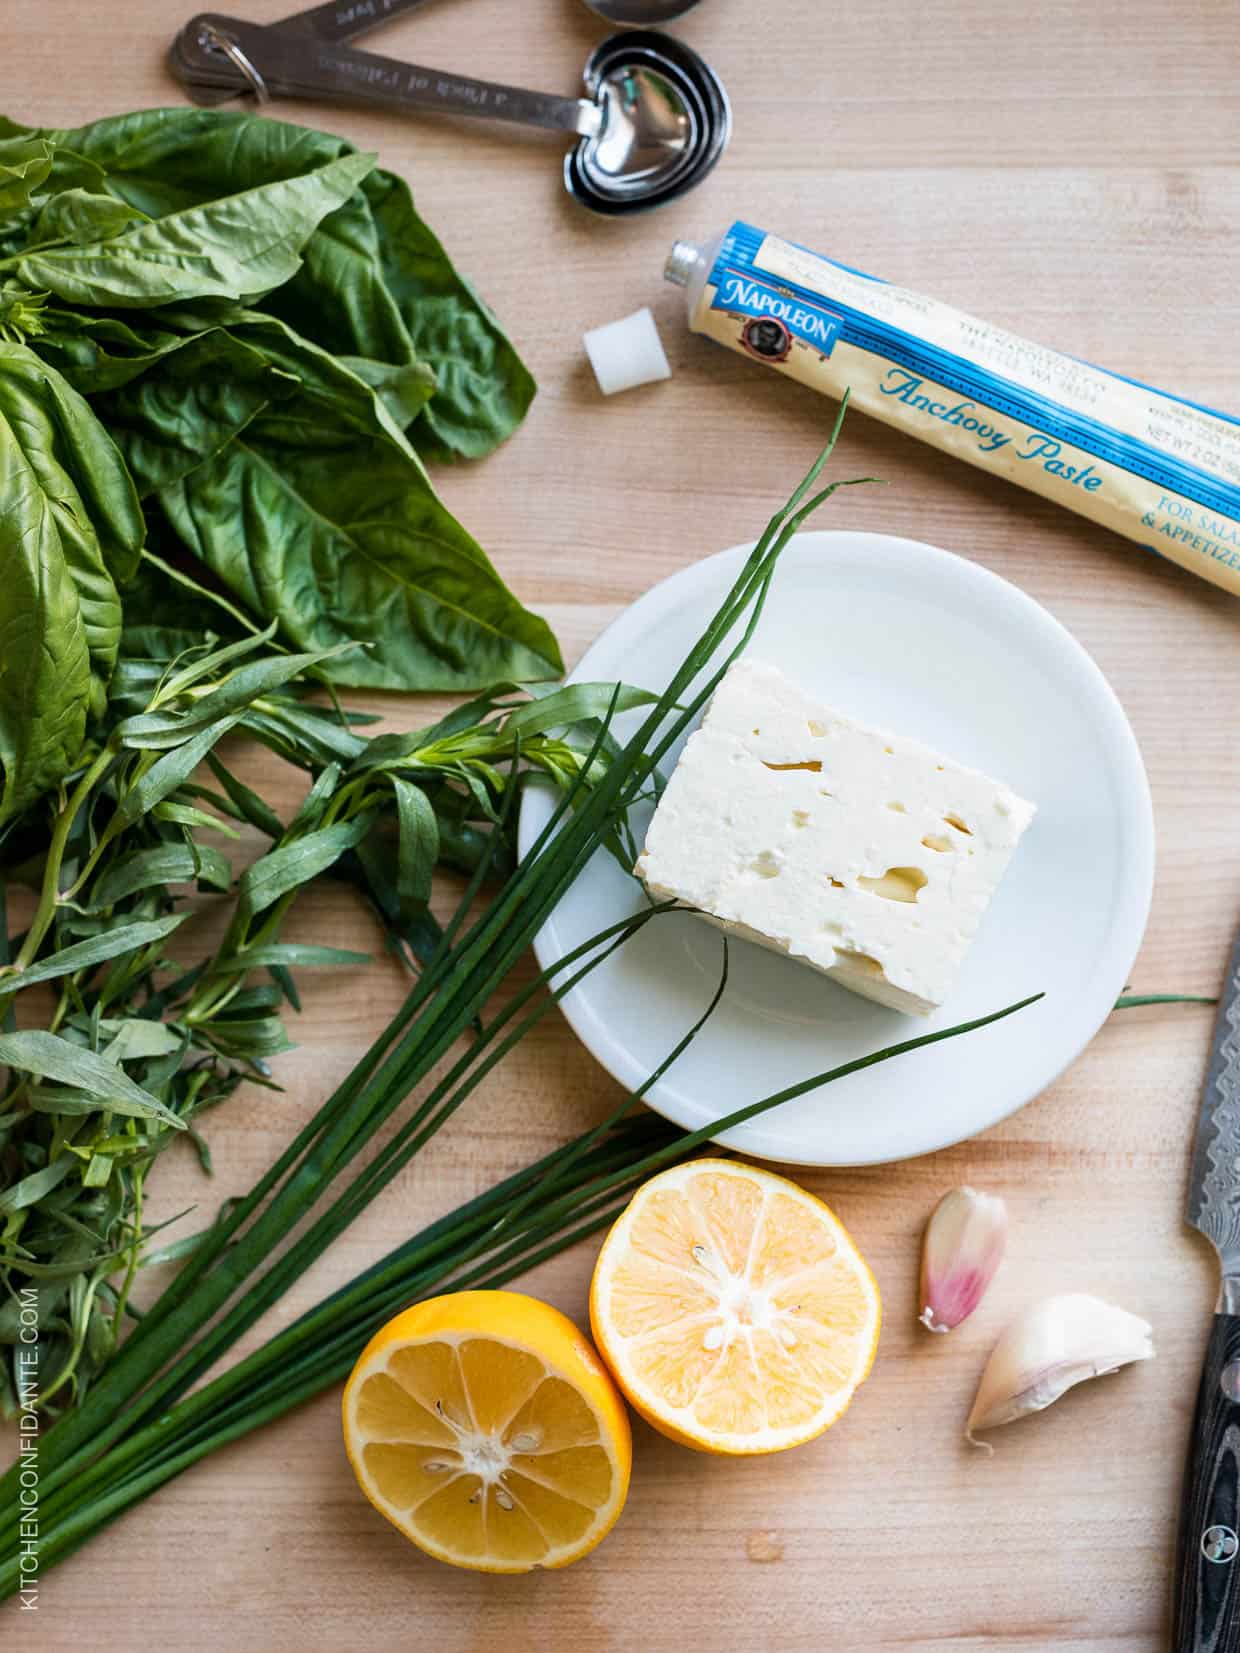 Fresh herbs, a halved lemon, and a small block of feta cheese on a wooden surface.